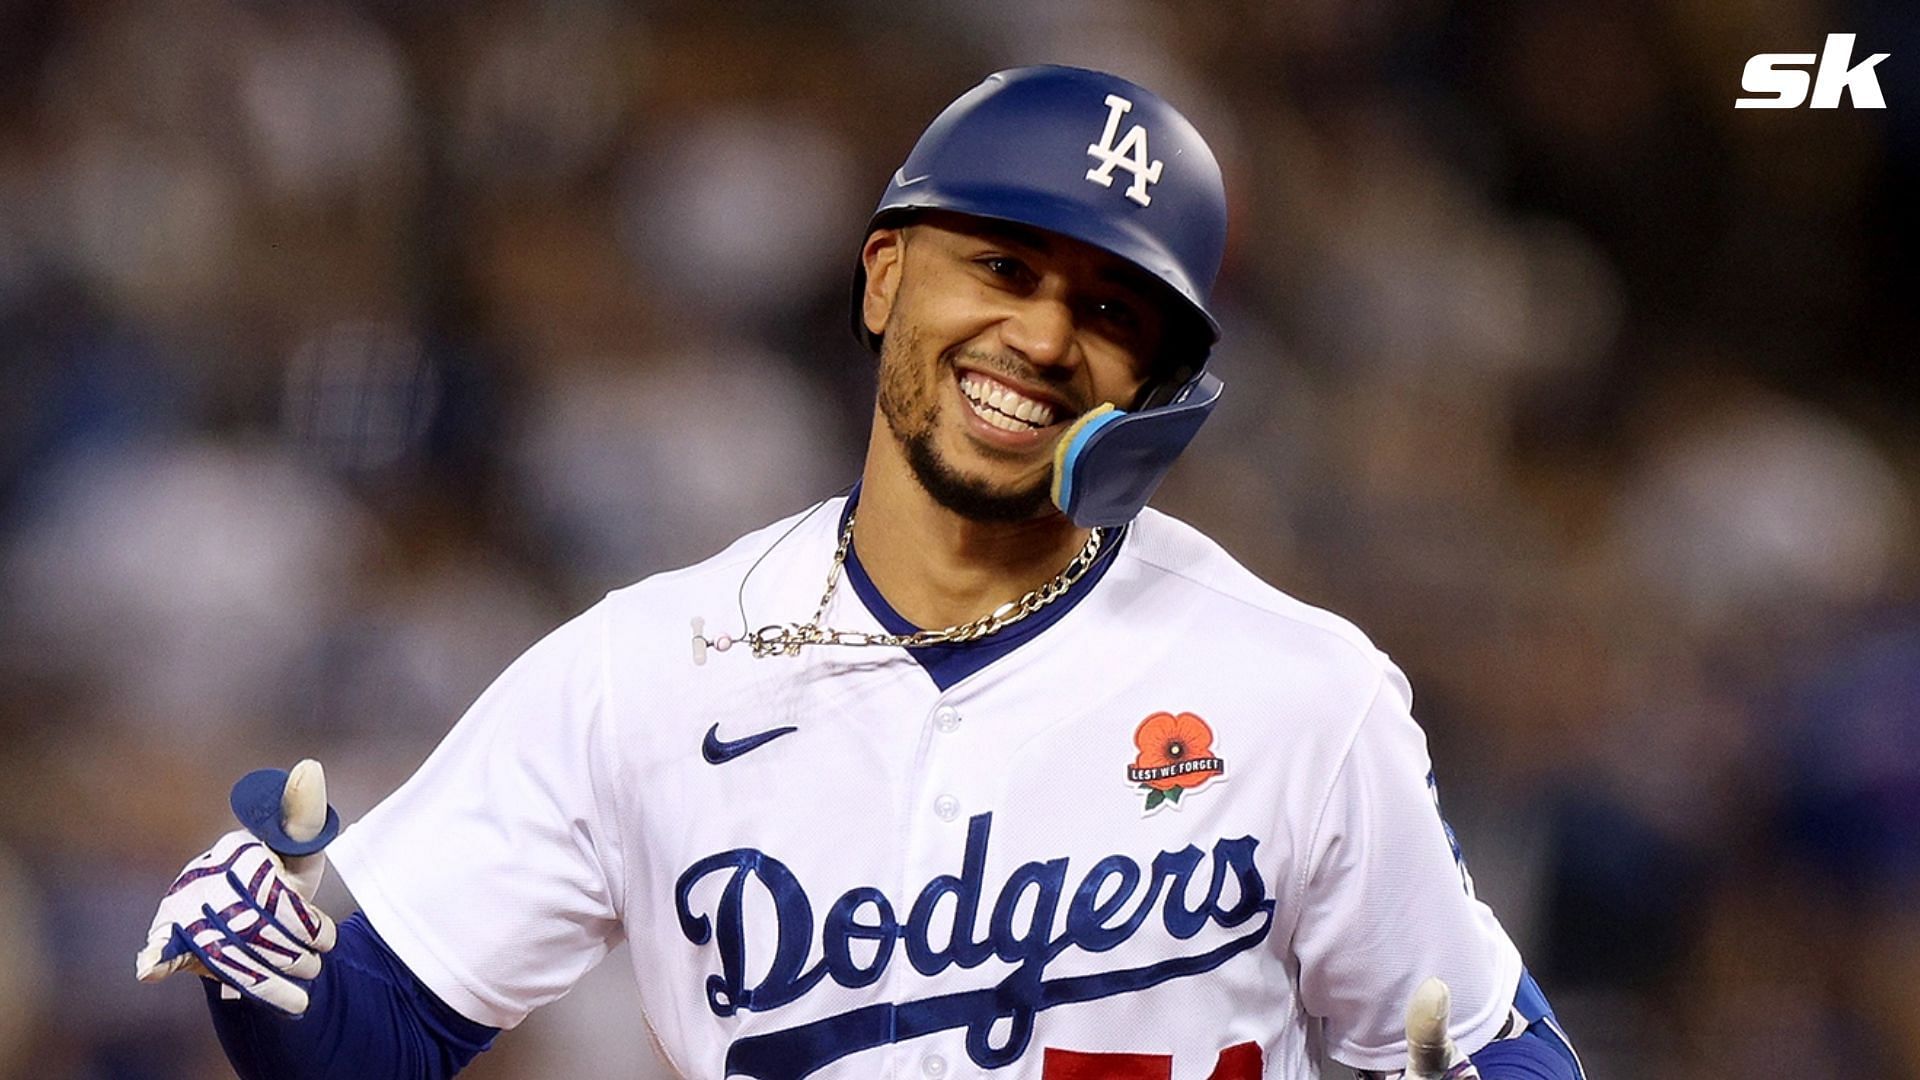 6x All-Star Mookie Betts was grooving while handing out turkeys at the Annual Thanksgiving Giveaway hosted by the LA Dodgers Foundation